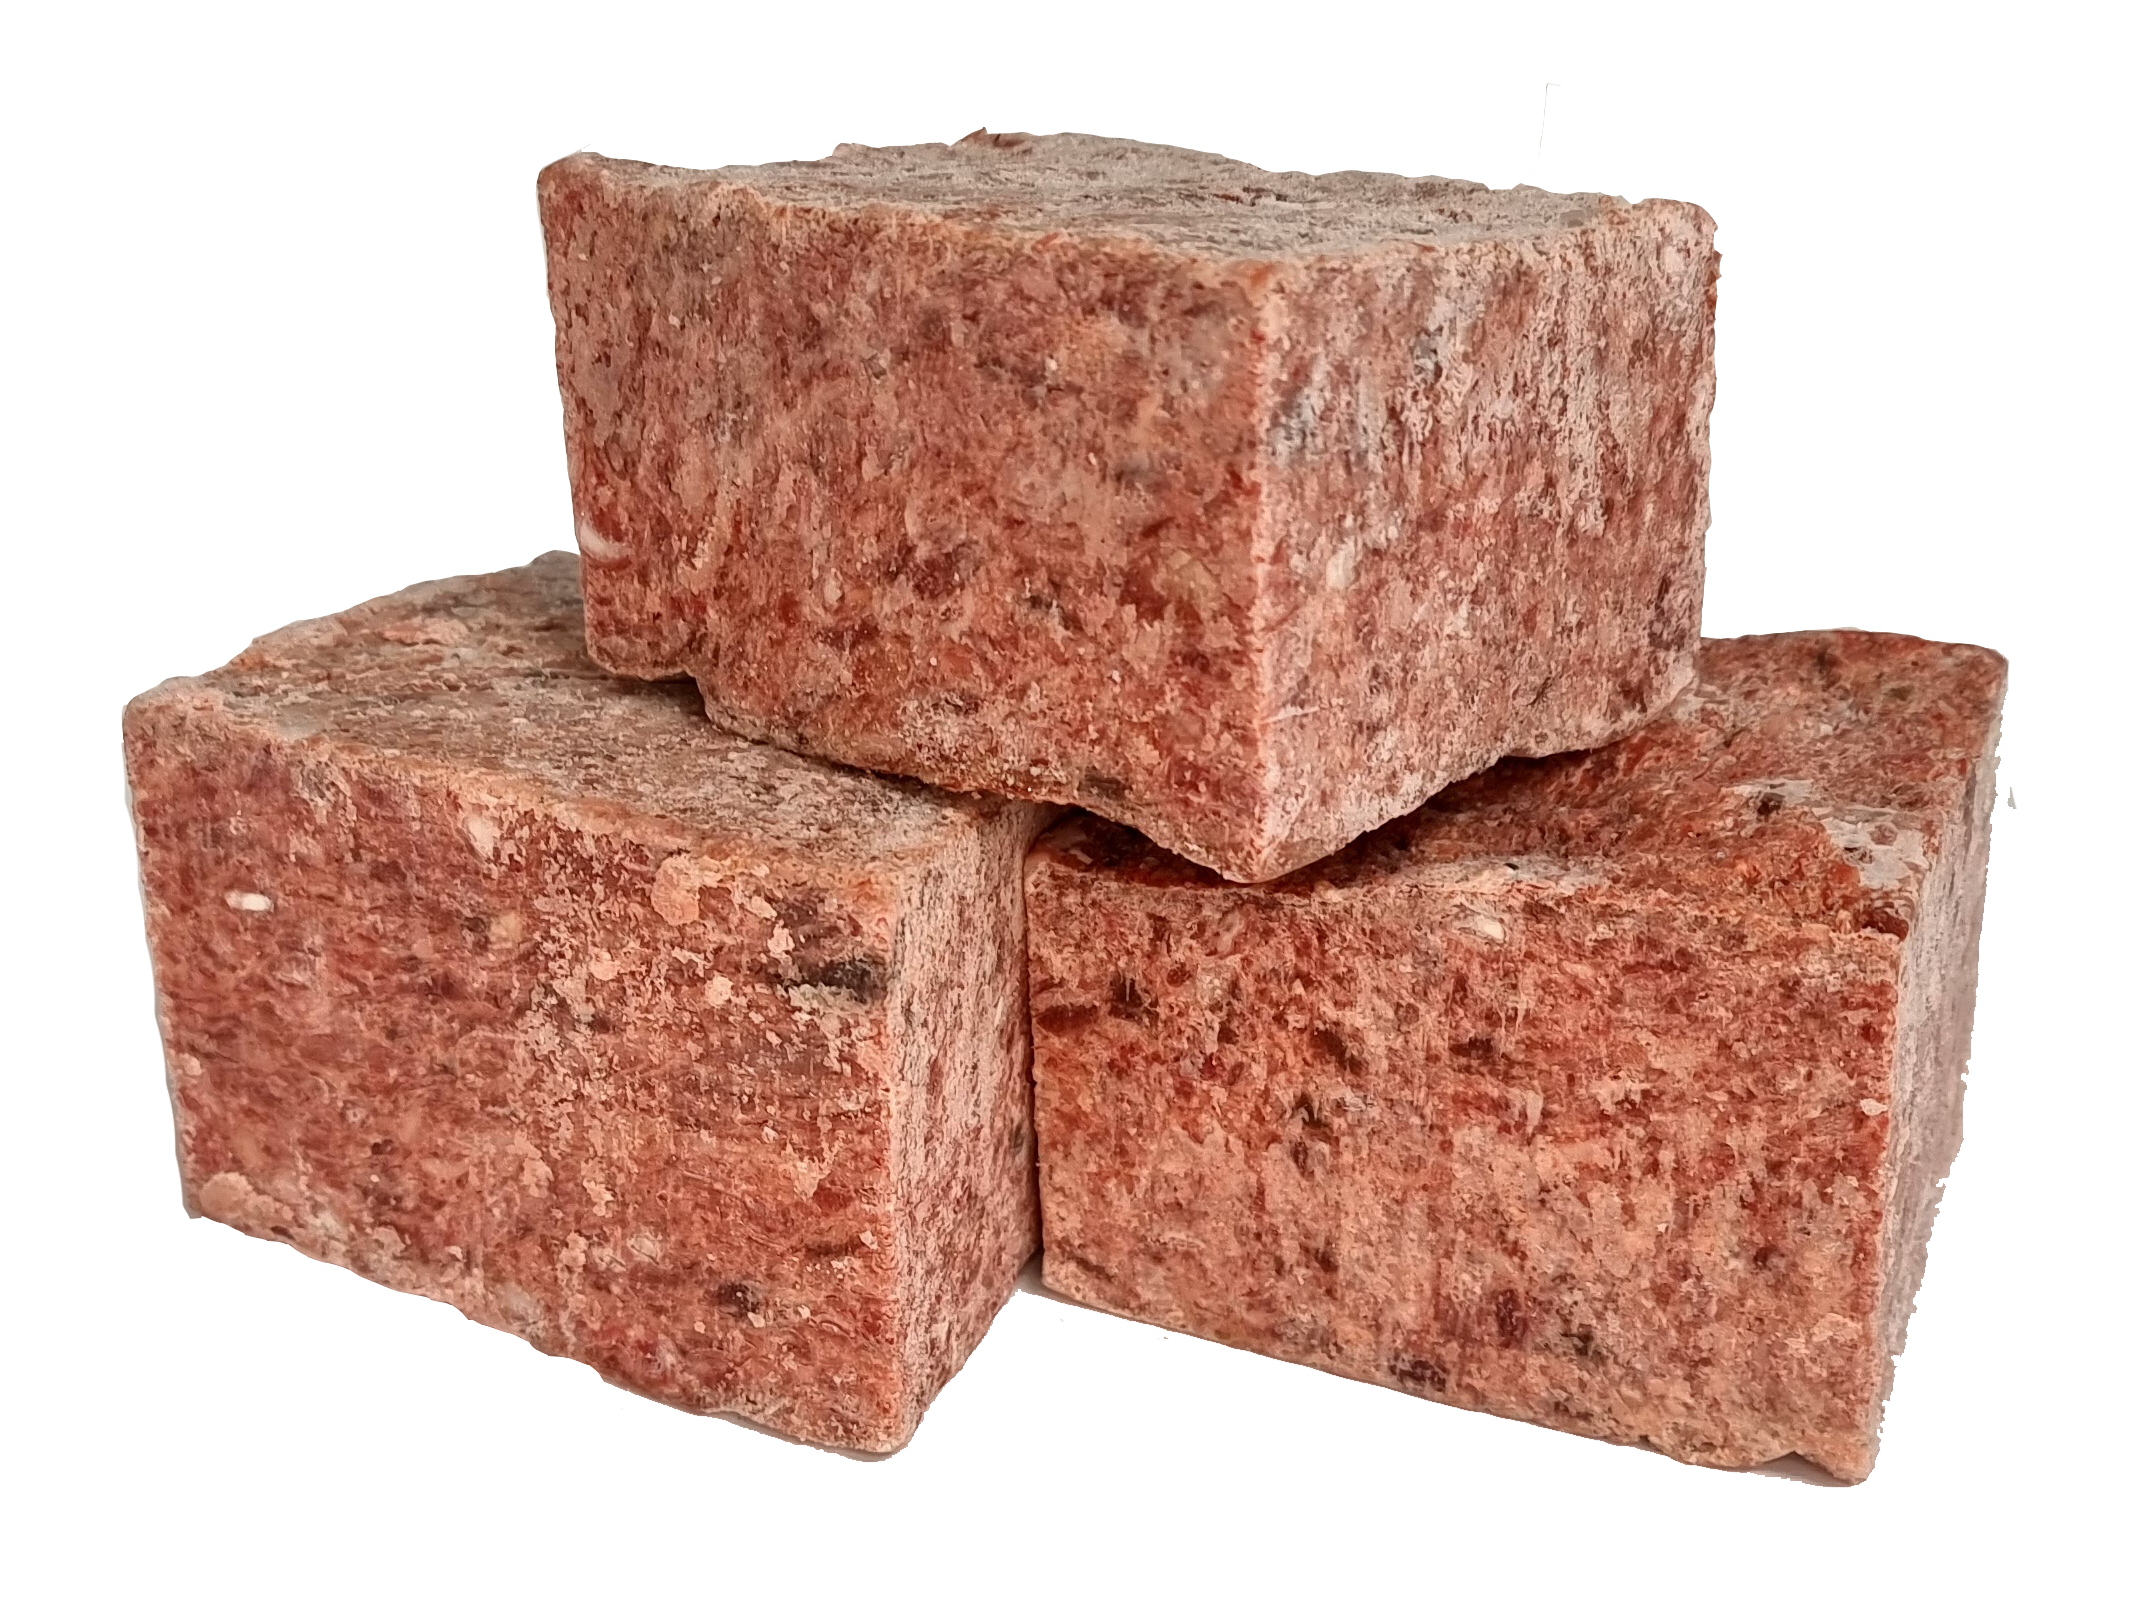 Click & Collect from MALDON - 5kgs Beef & Chicken Complete Mince - 10 x unwrapped blocks of Raw Frozen Mince